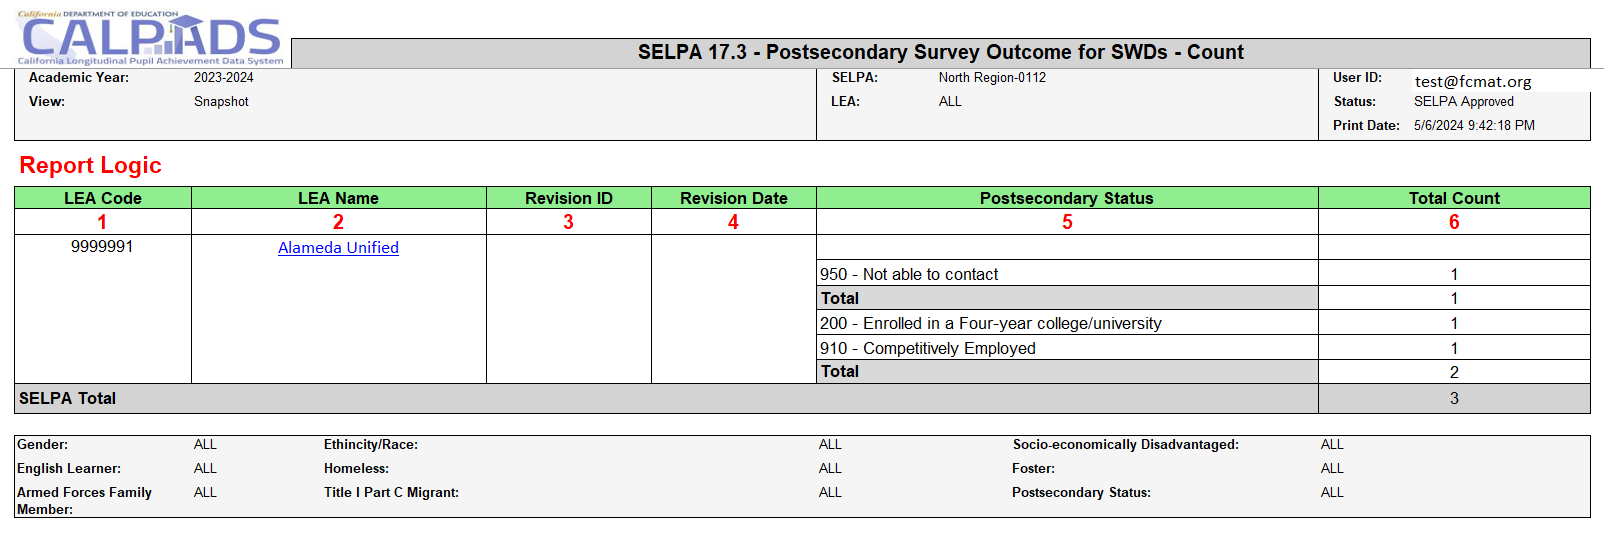 Report 17.3 - SELPA Postsecondary Survey Outcome for SWDs - Count 